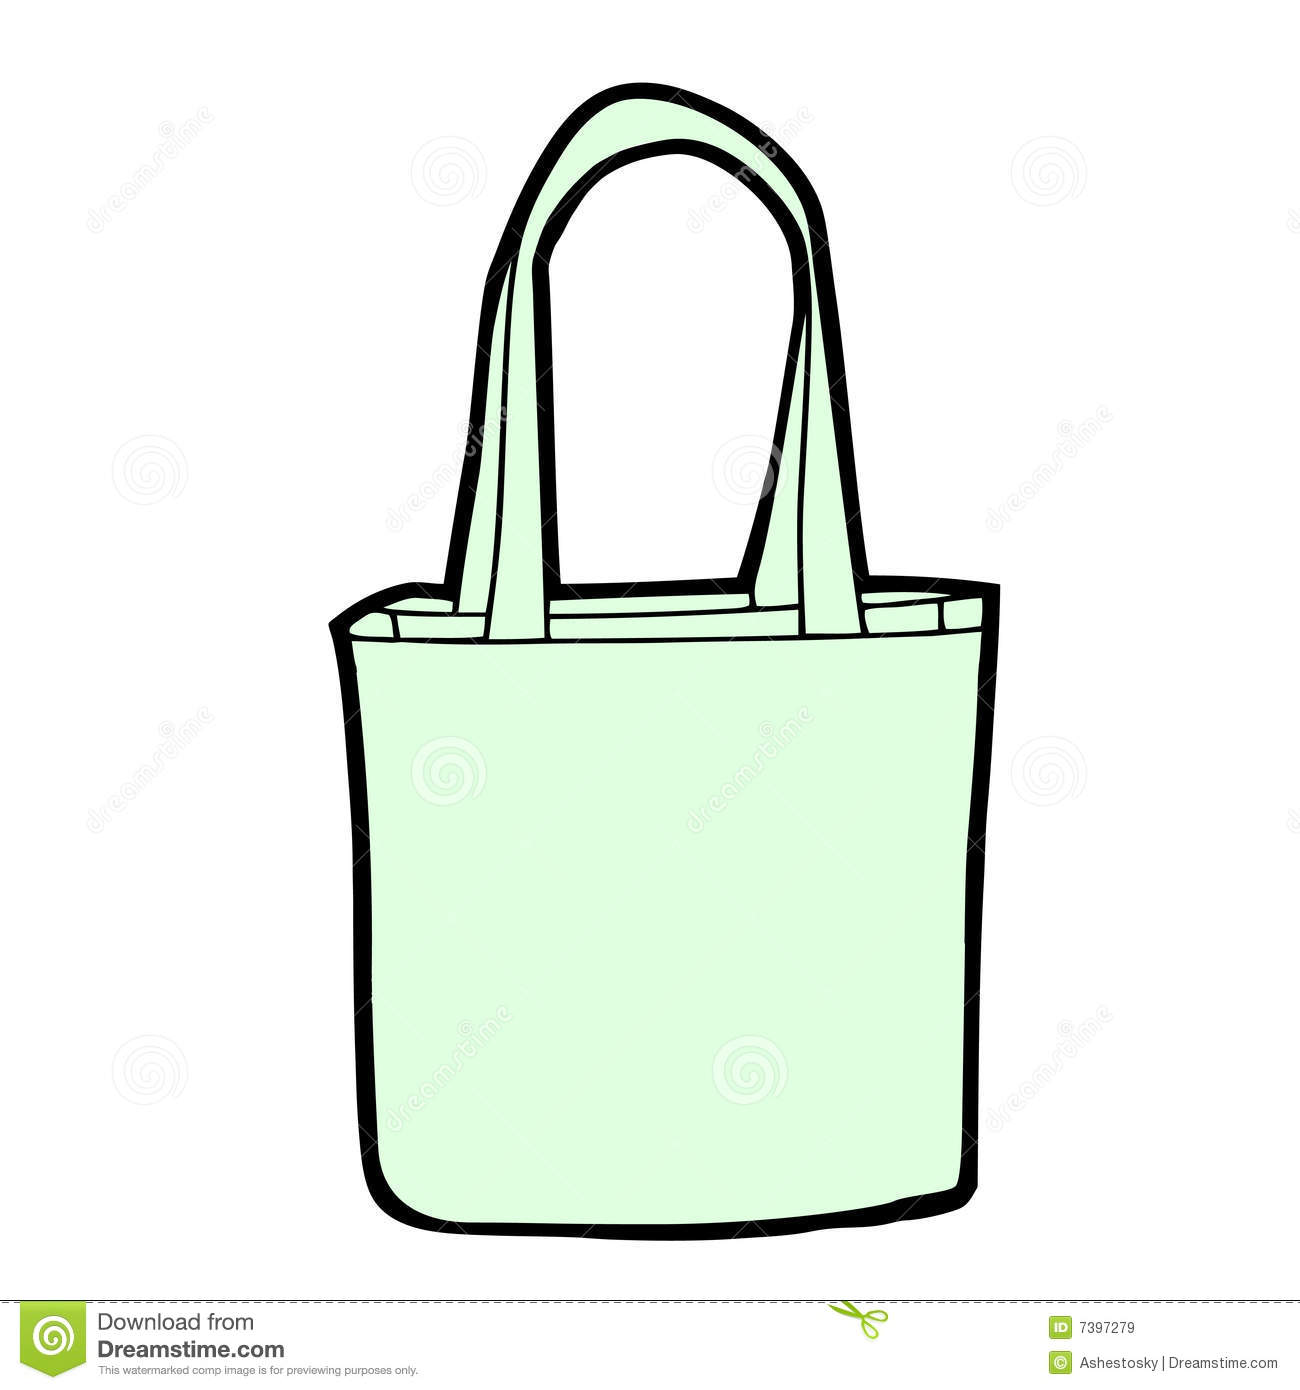 Dreamstime Comvector Shopping Bag Blank Royalty Free Stock Images